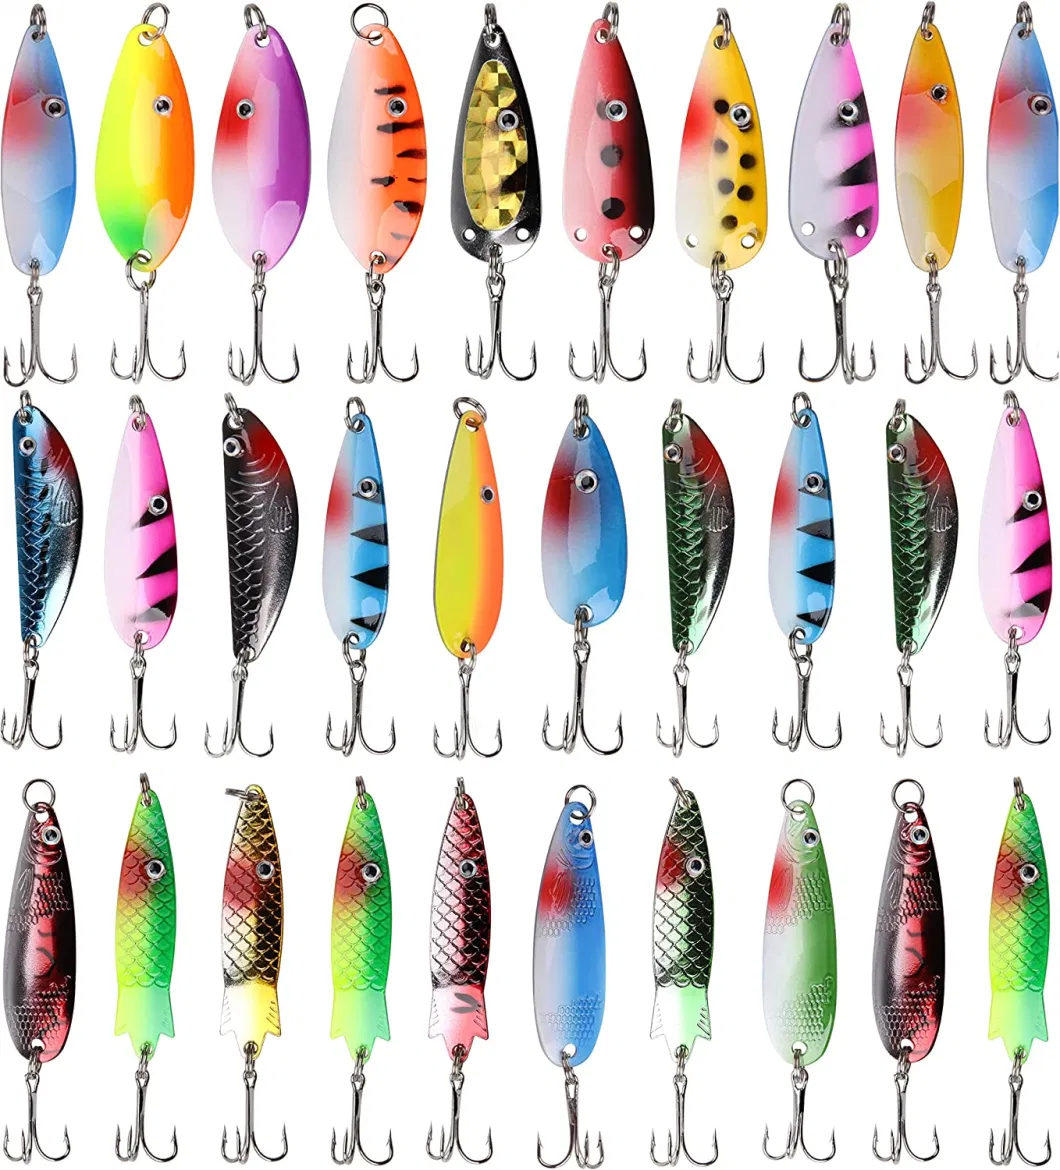 Fishing Spoons Metal Lures, 30PCS Colorful Casting Fishing Spinner Baits Trout Trolling Spoon Fishing Lures Sharp Treble Hooks Tackle Kit